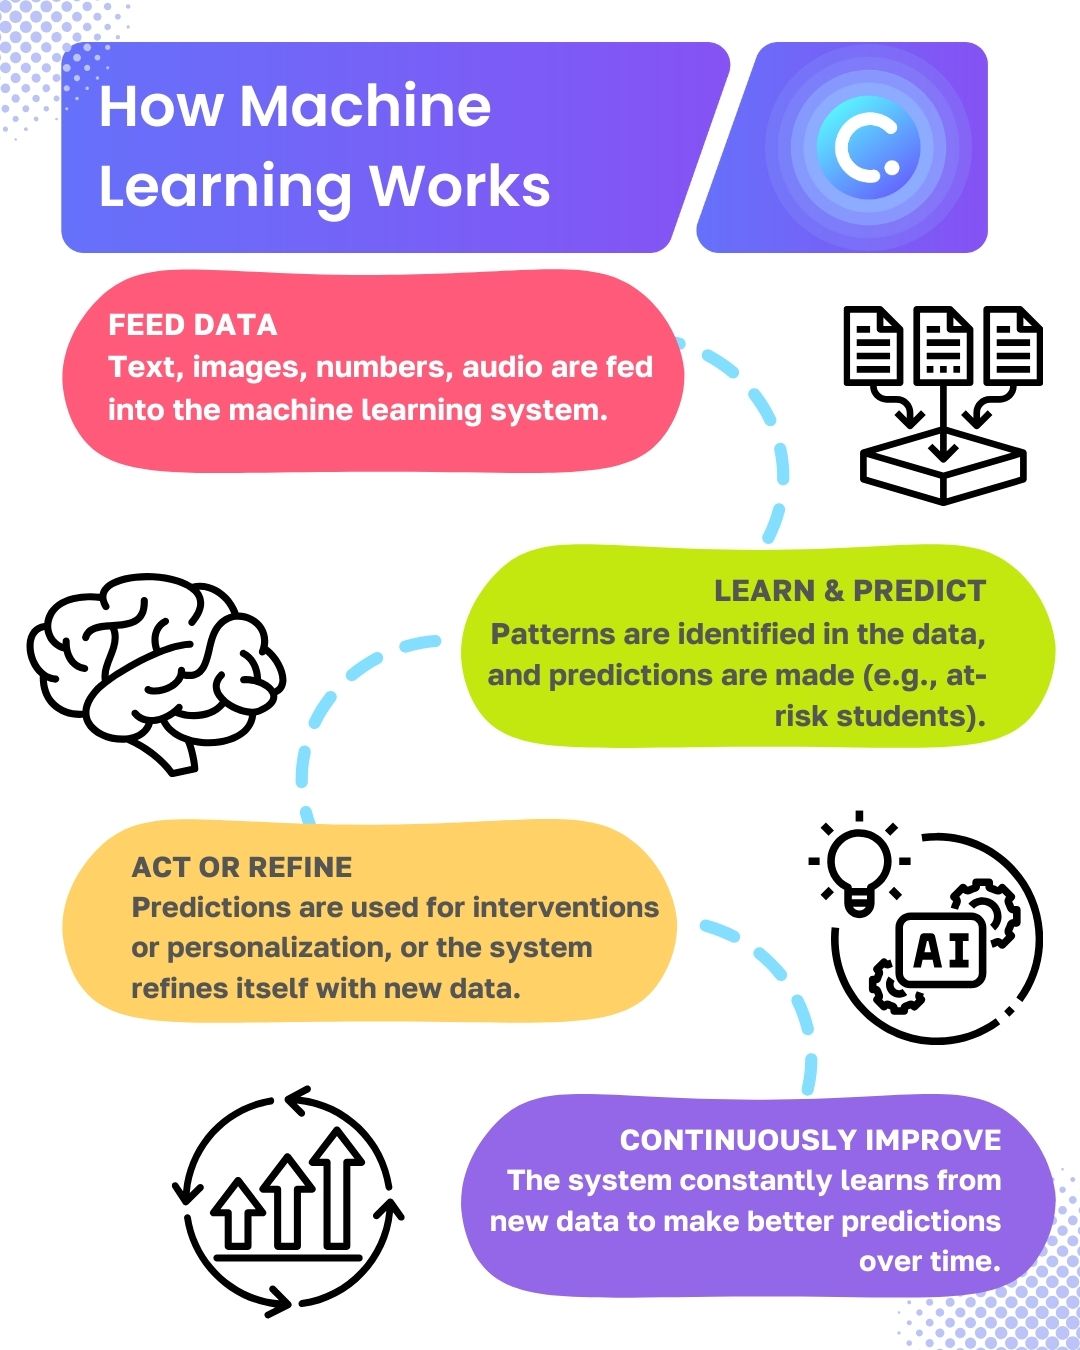 How machine learning in education works